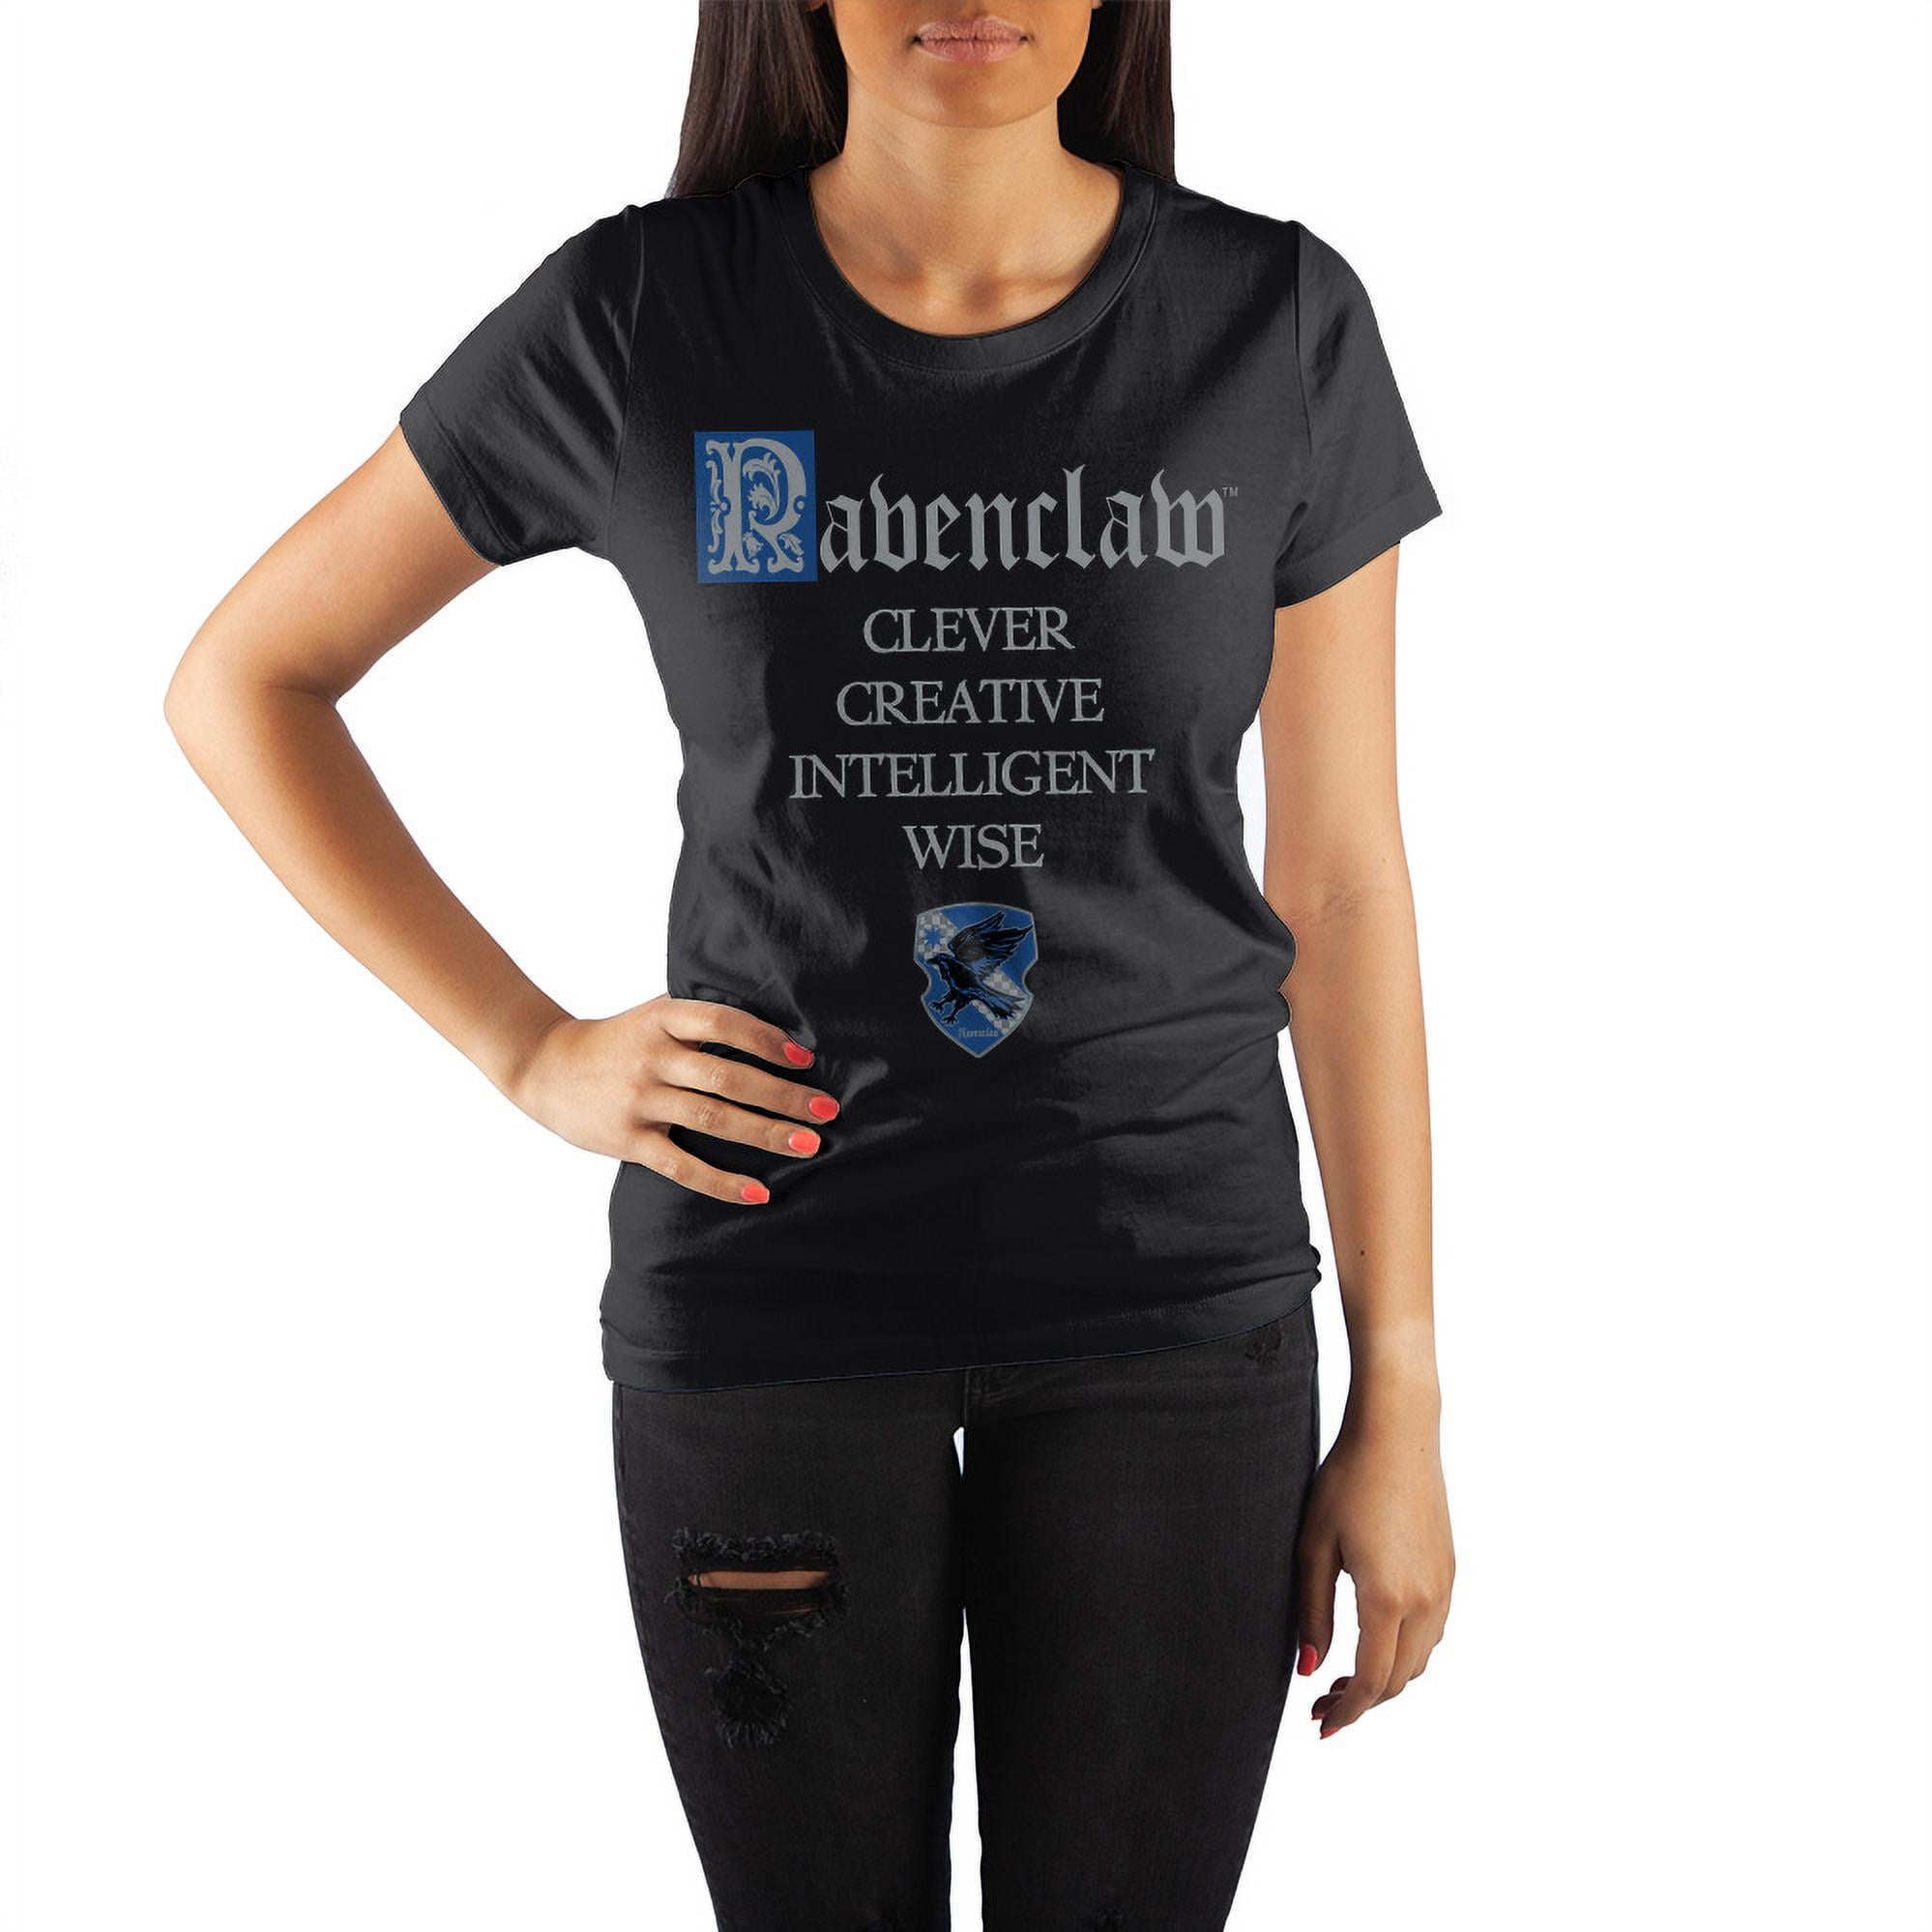 Wise & T-Shirt Characteristics House Crest Potter Juniors Intelligent Tee Creative Shirt-Small Ravenclaw Black of Clever Harry